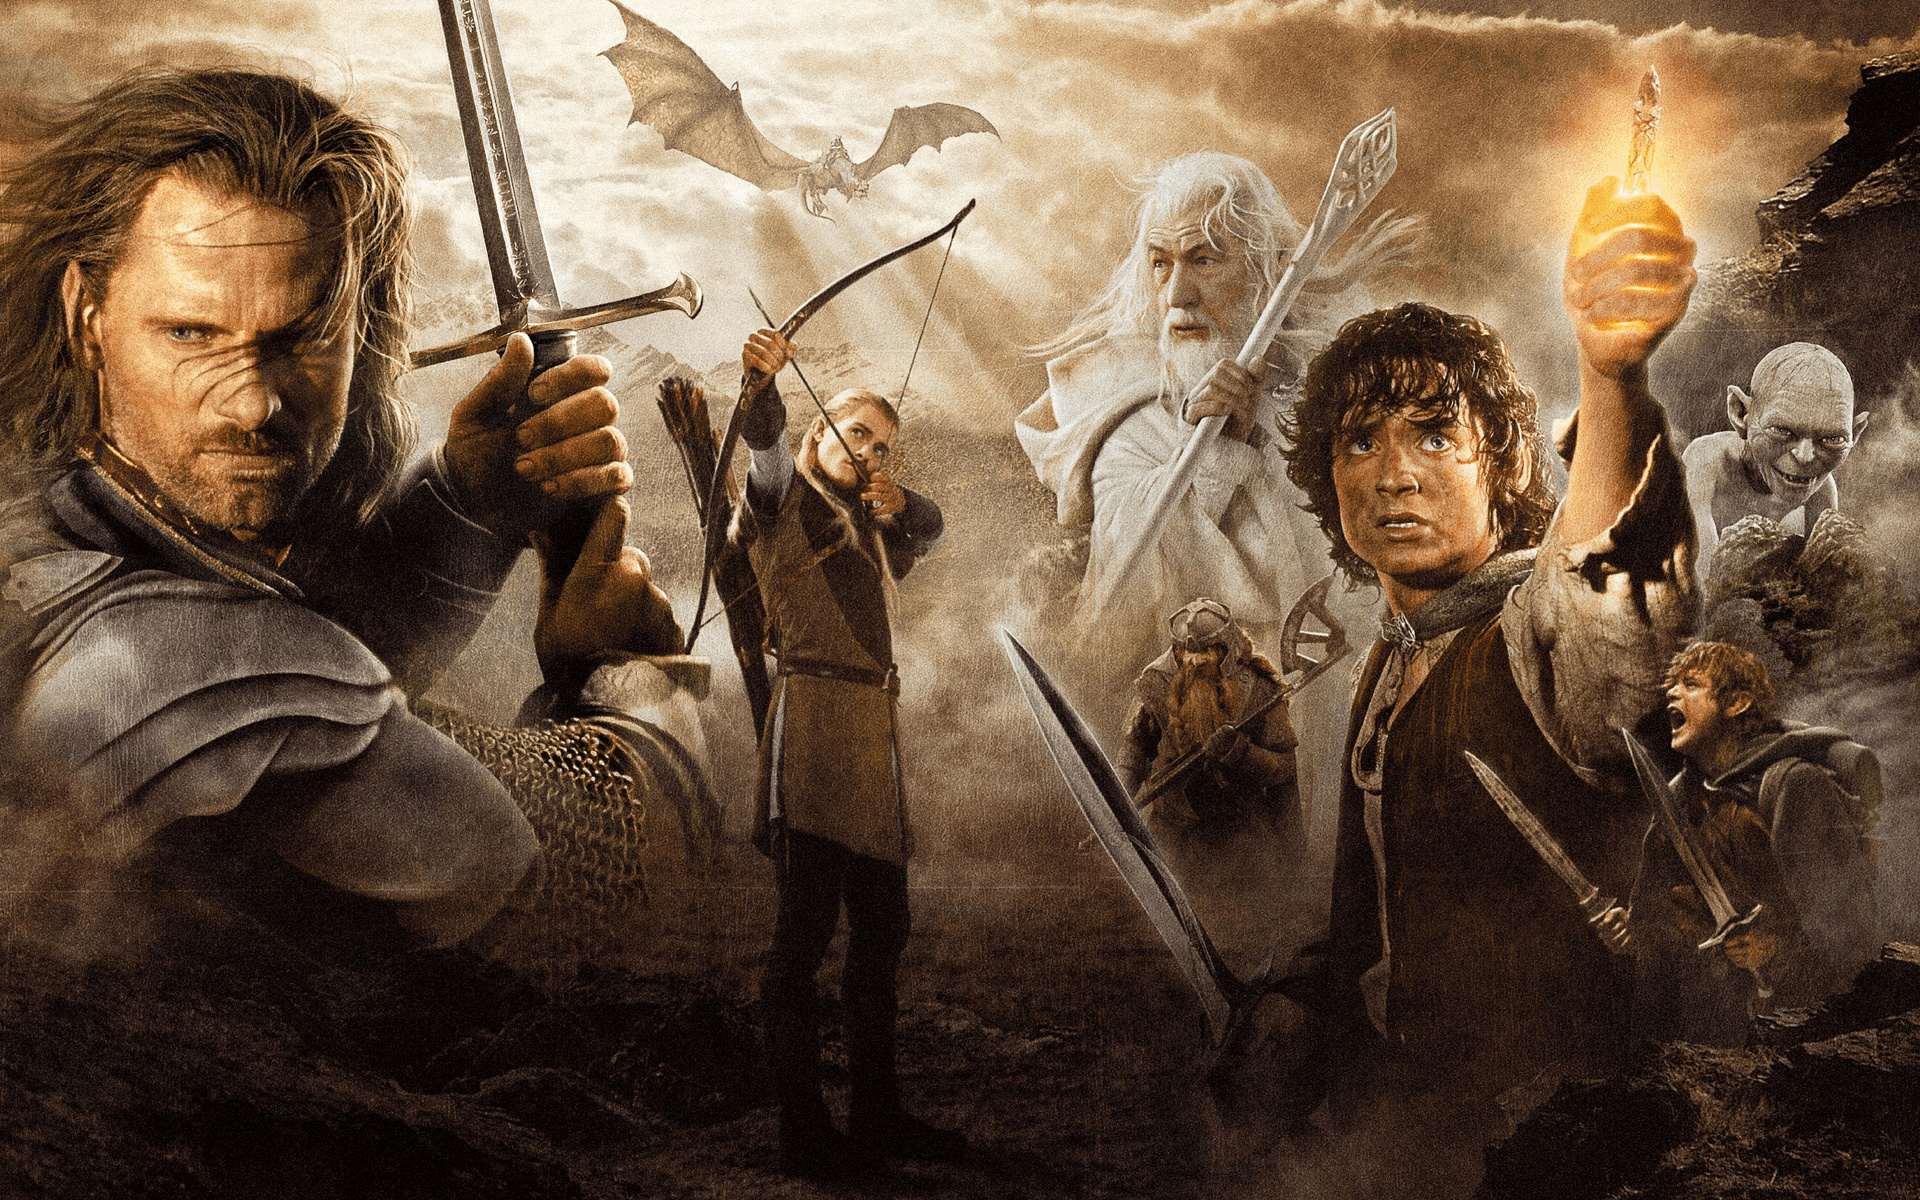 The Lord of the Rings, Fellowship of the Ring wallpapers, 2020 collection, Broken Panda, 1920x1200 HD Desktop